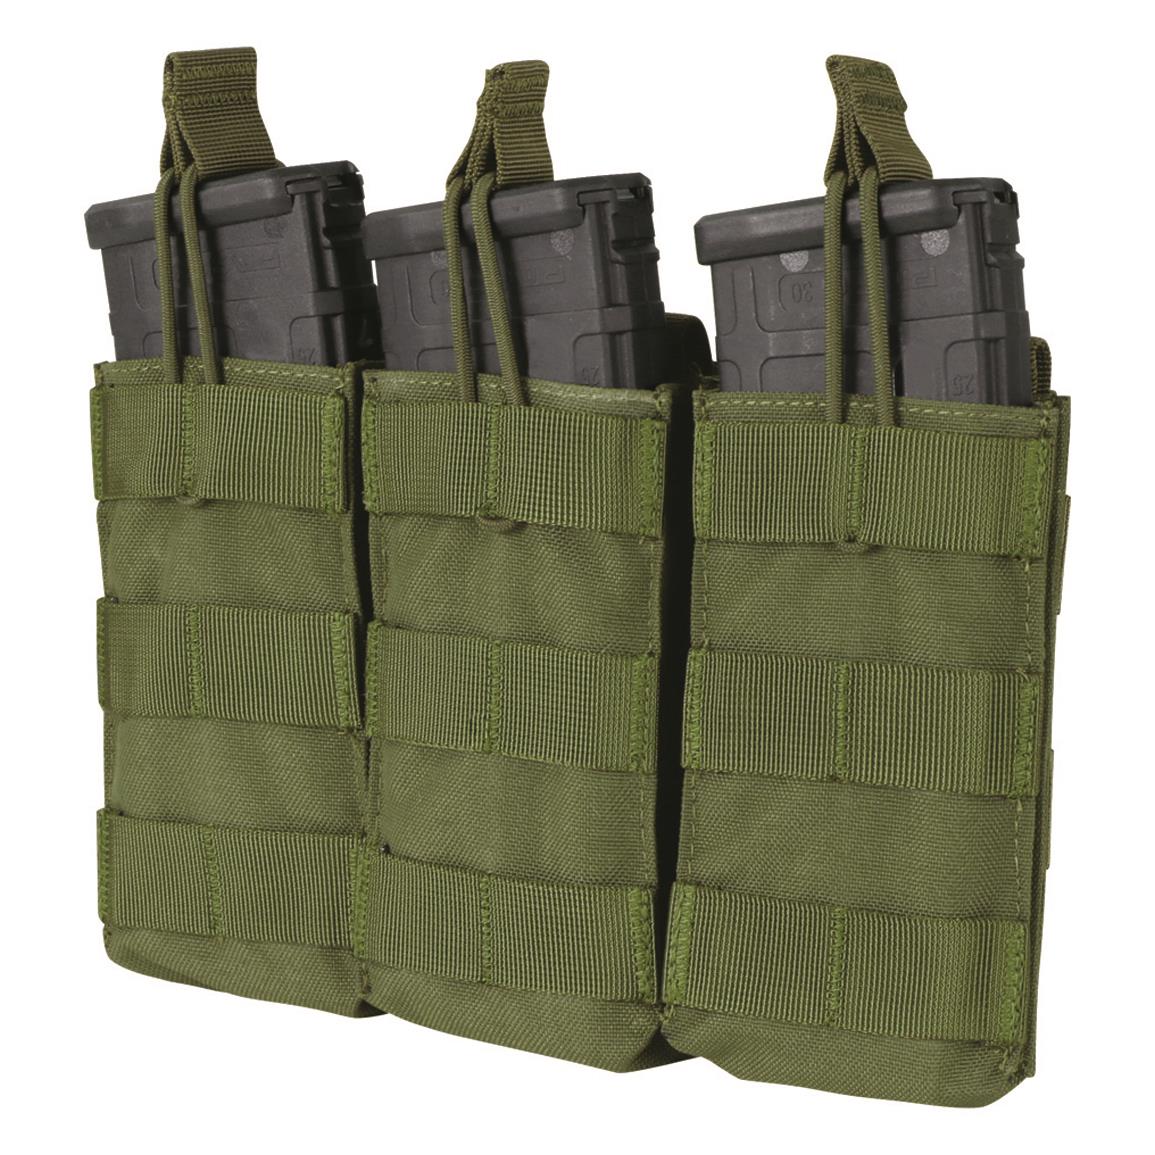 Condor M4/M16 Open Top Triple Mag Pouch, Olive Drab